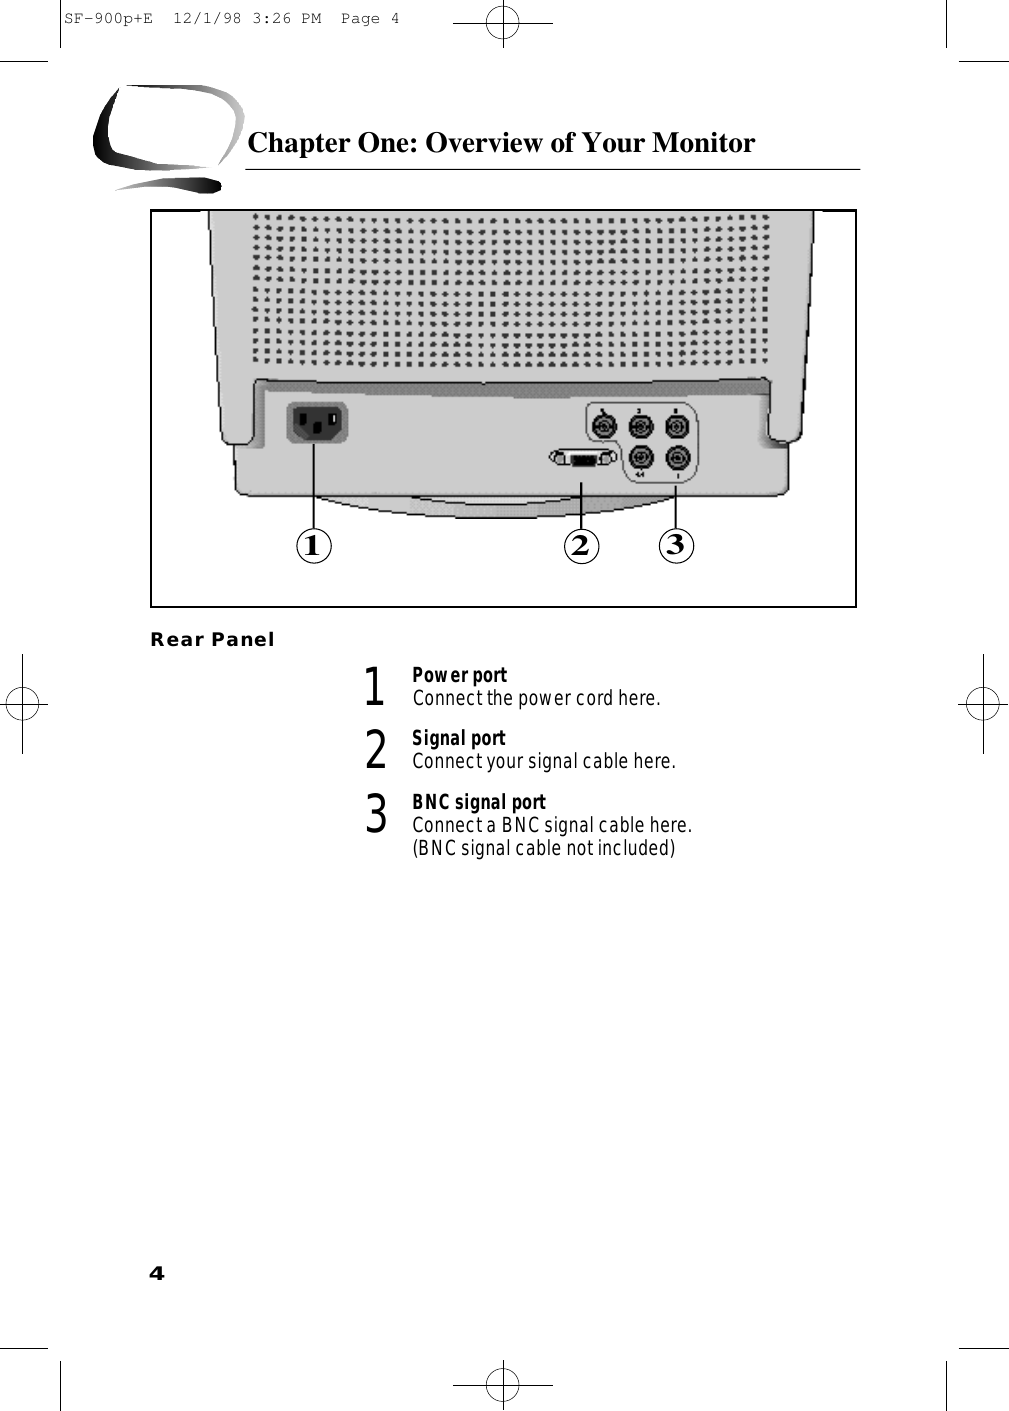 4Chapter One: Overview of Your MonitorRear Panel 1Power portConnect the power cord here.2Signal portConnect your signal cable here.3BNC signal portConnect a BNC signal cable here. (BNC signal cable not included) 123SF-900p+E  12/1/98 3:26 PM  Page 4